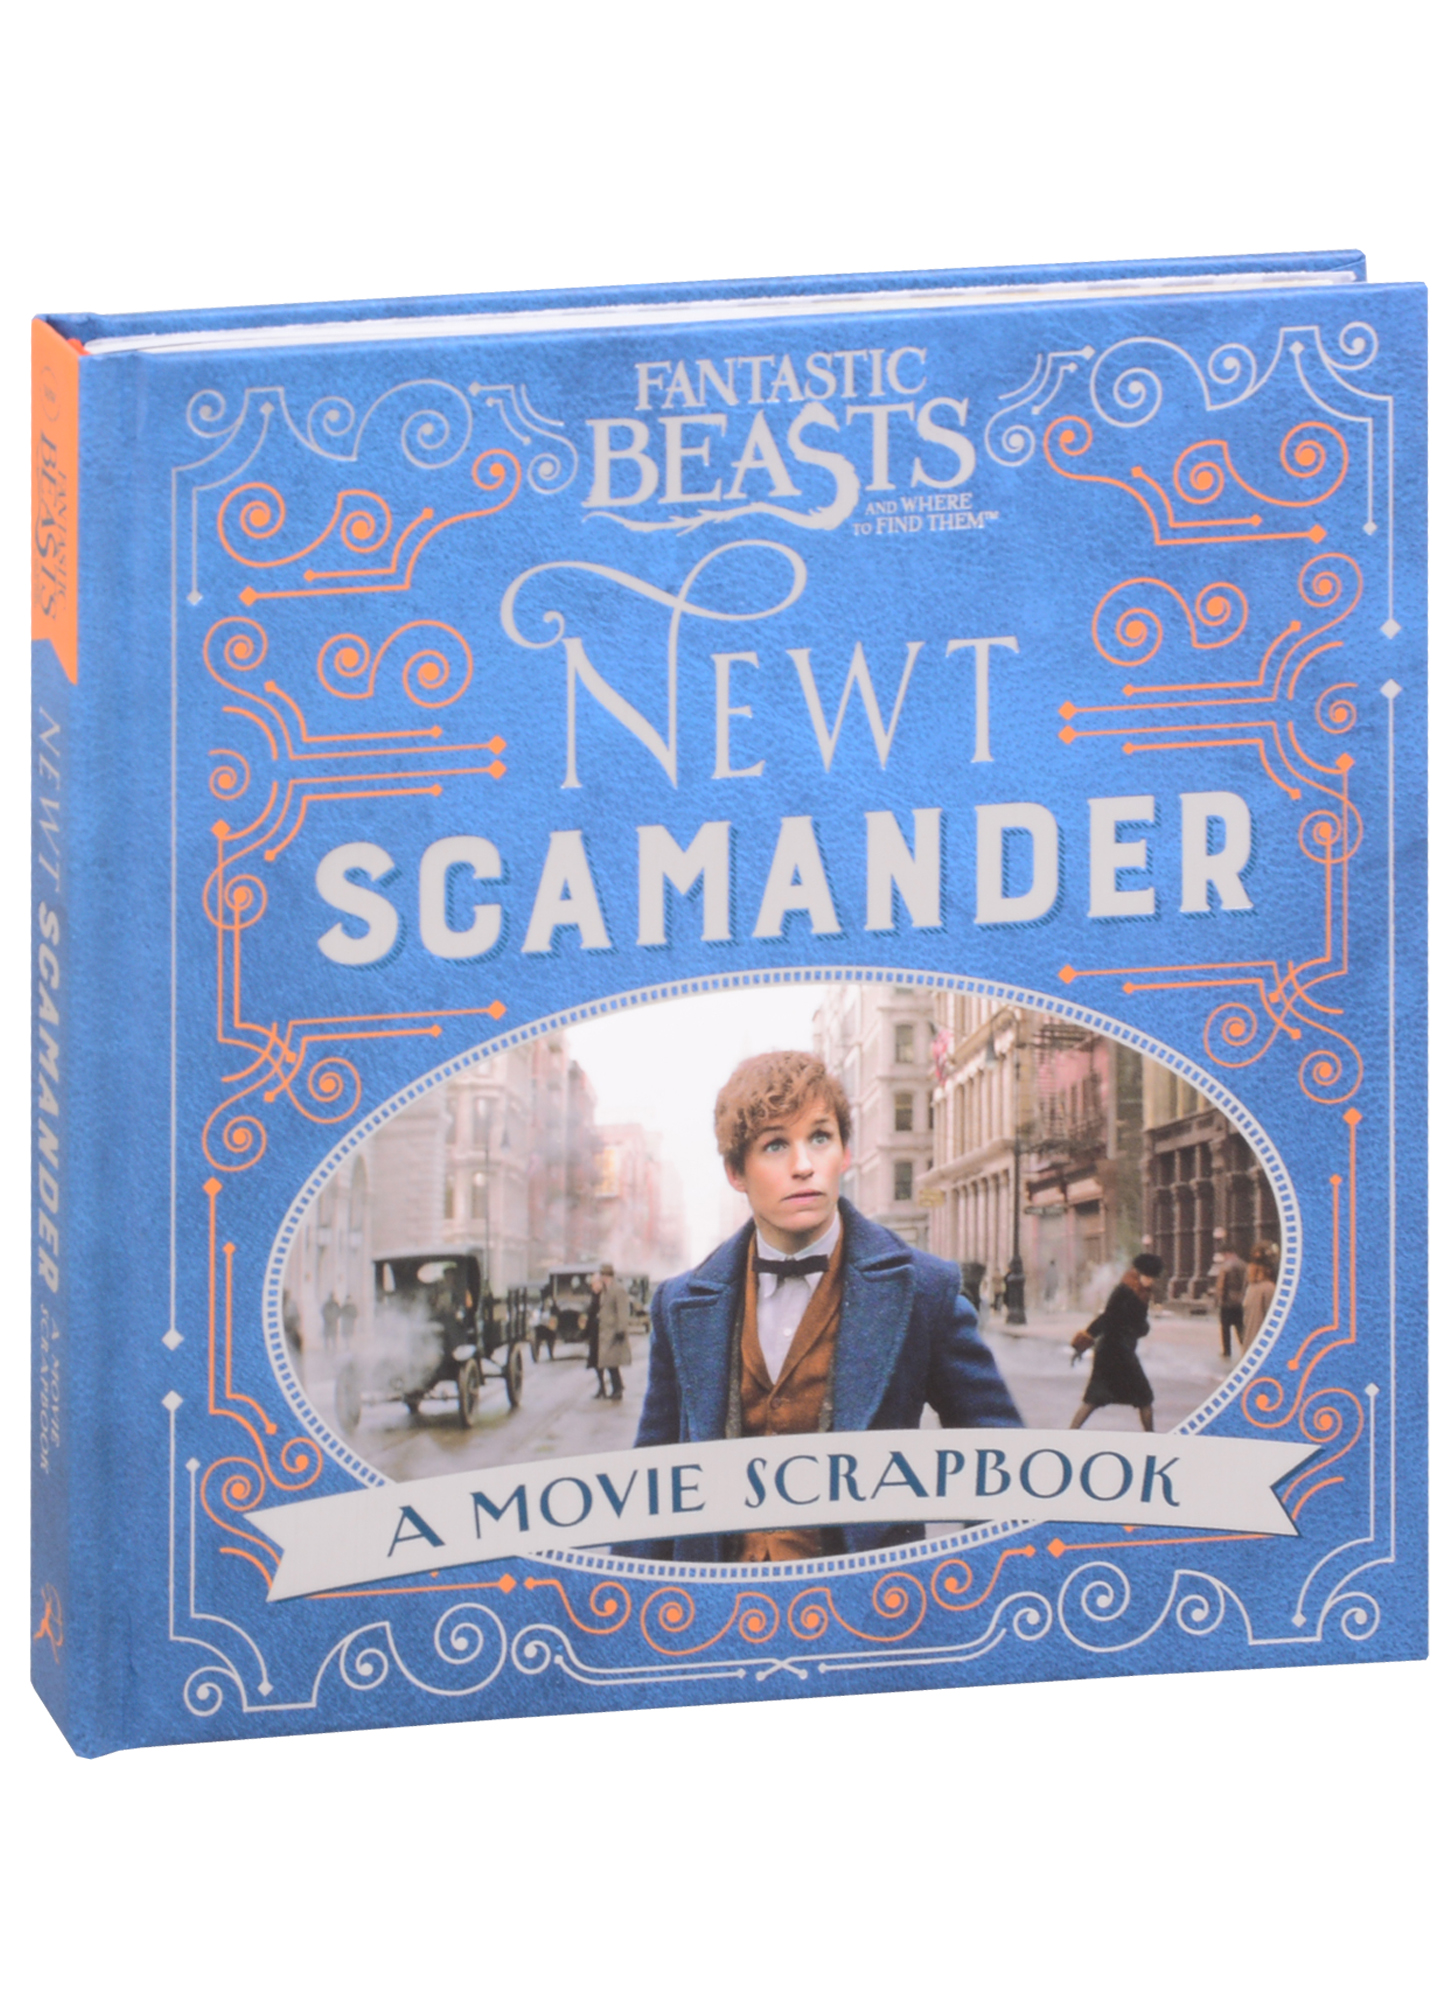 Fantastic Beasts and Where to Find Them - Newt Scamander. A Movie Scrapbook